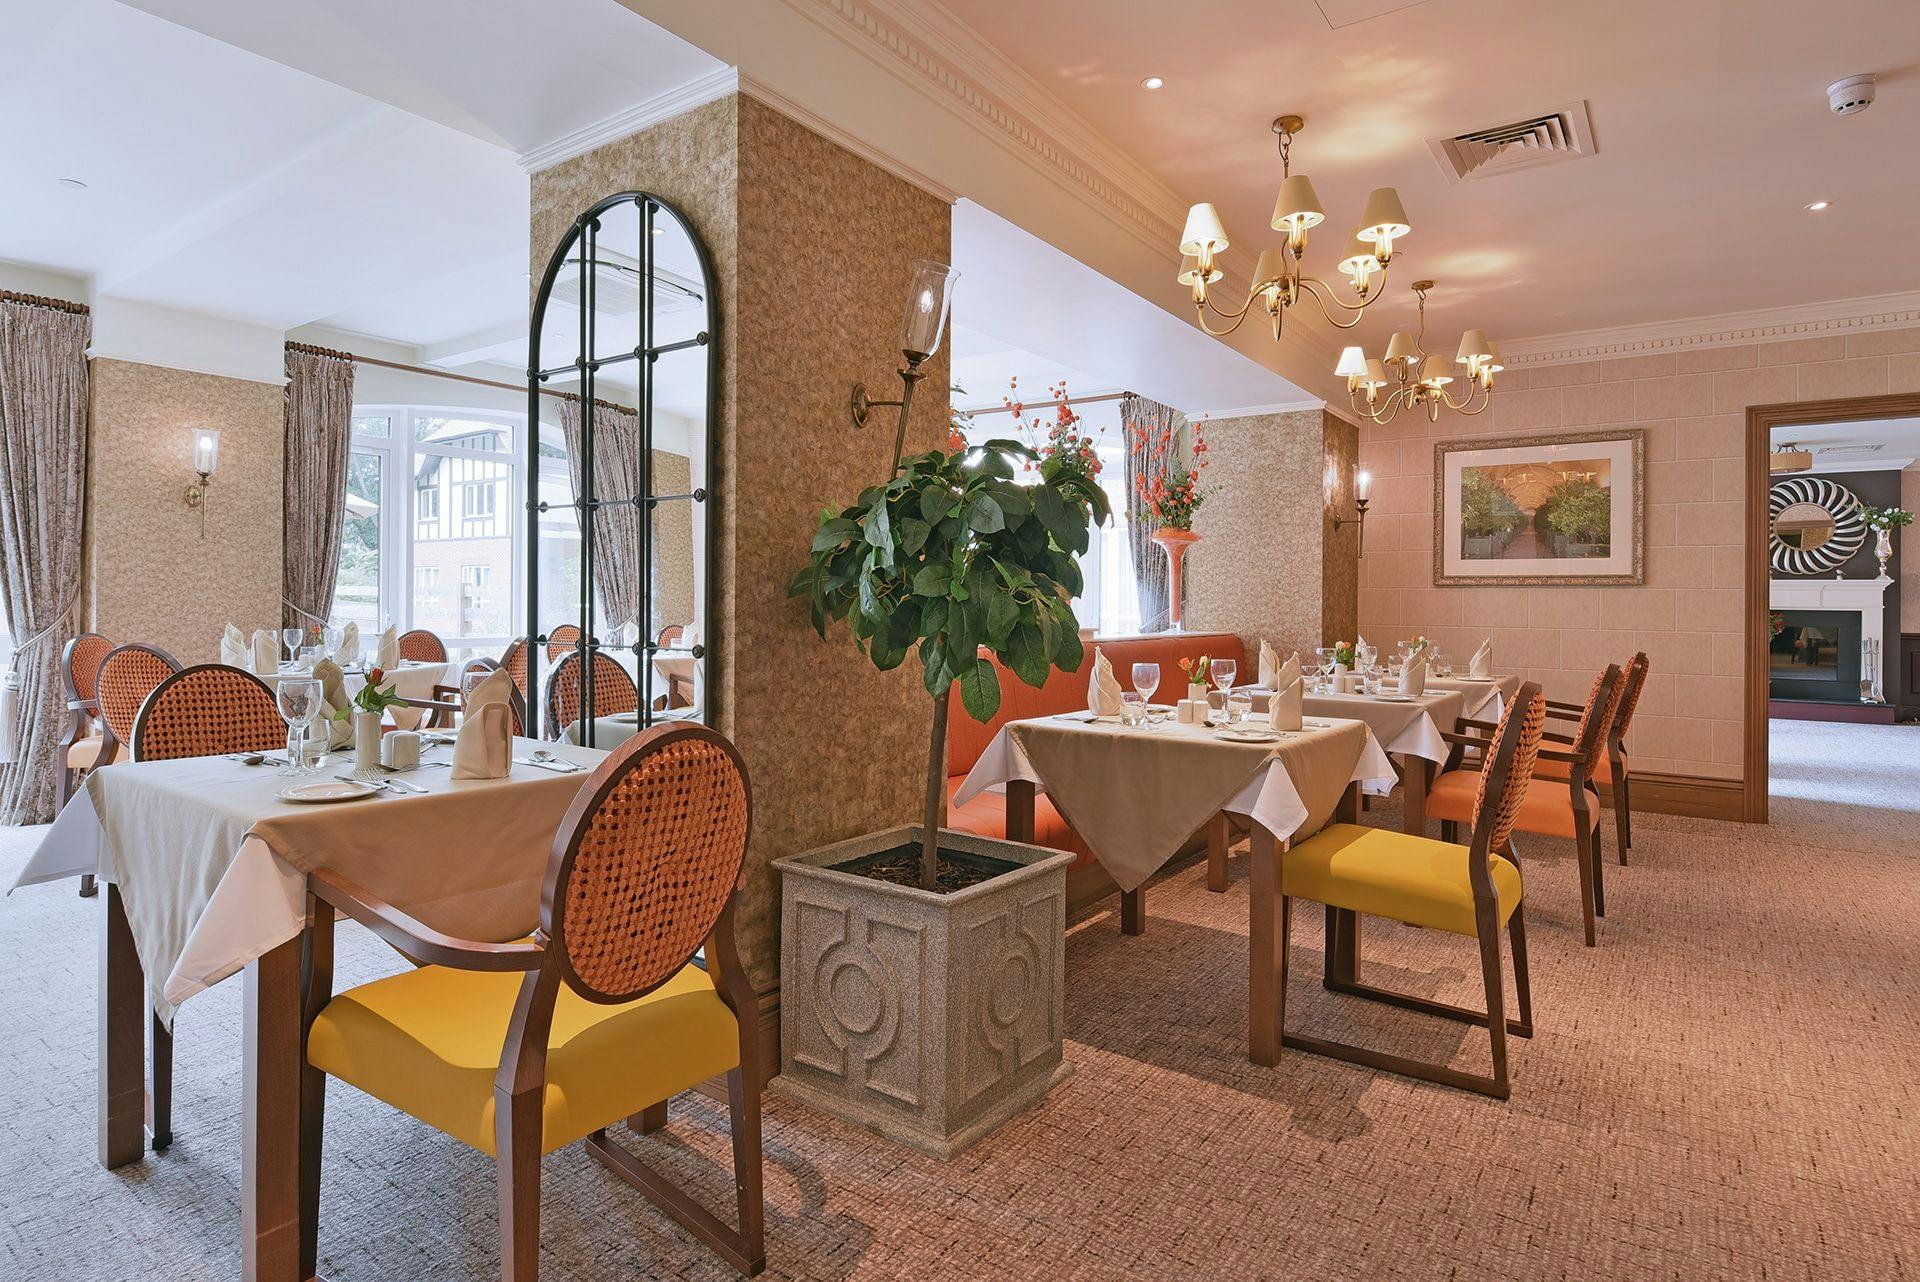 Dining area of Ascot Grange care home in Ascot, Berkshire